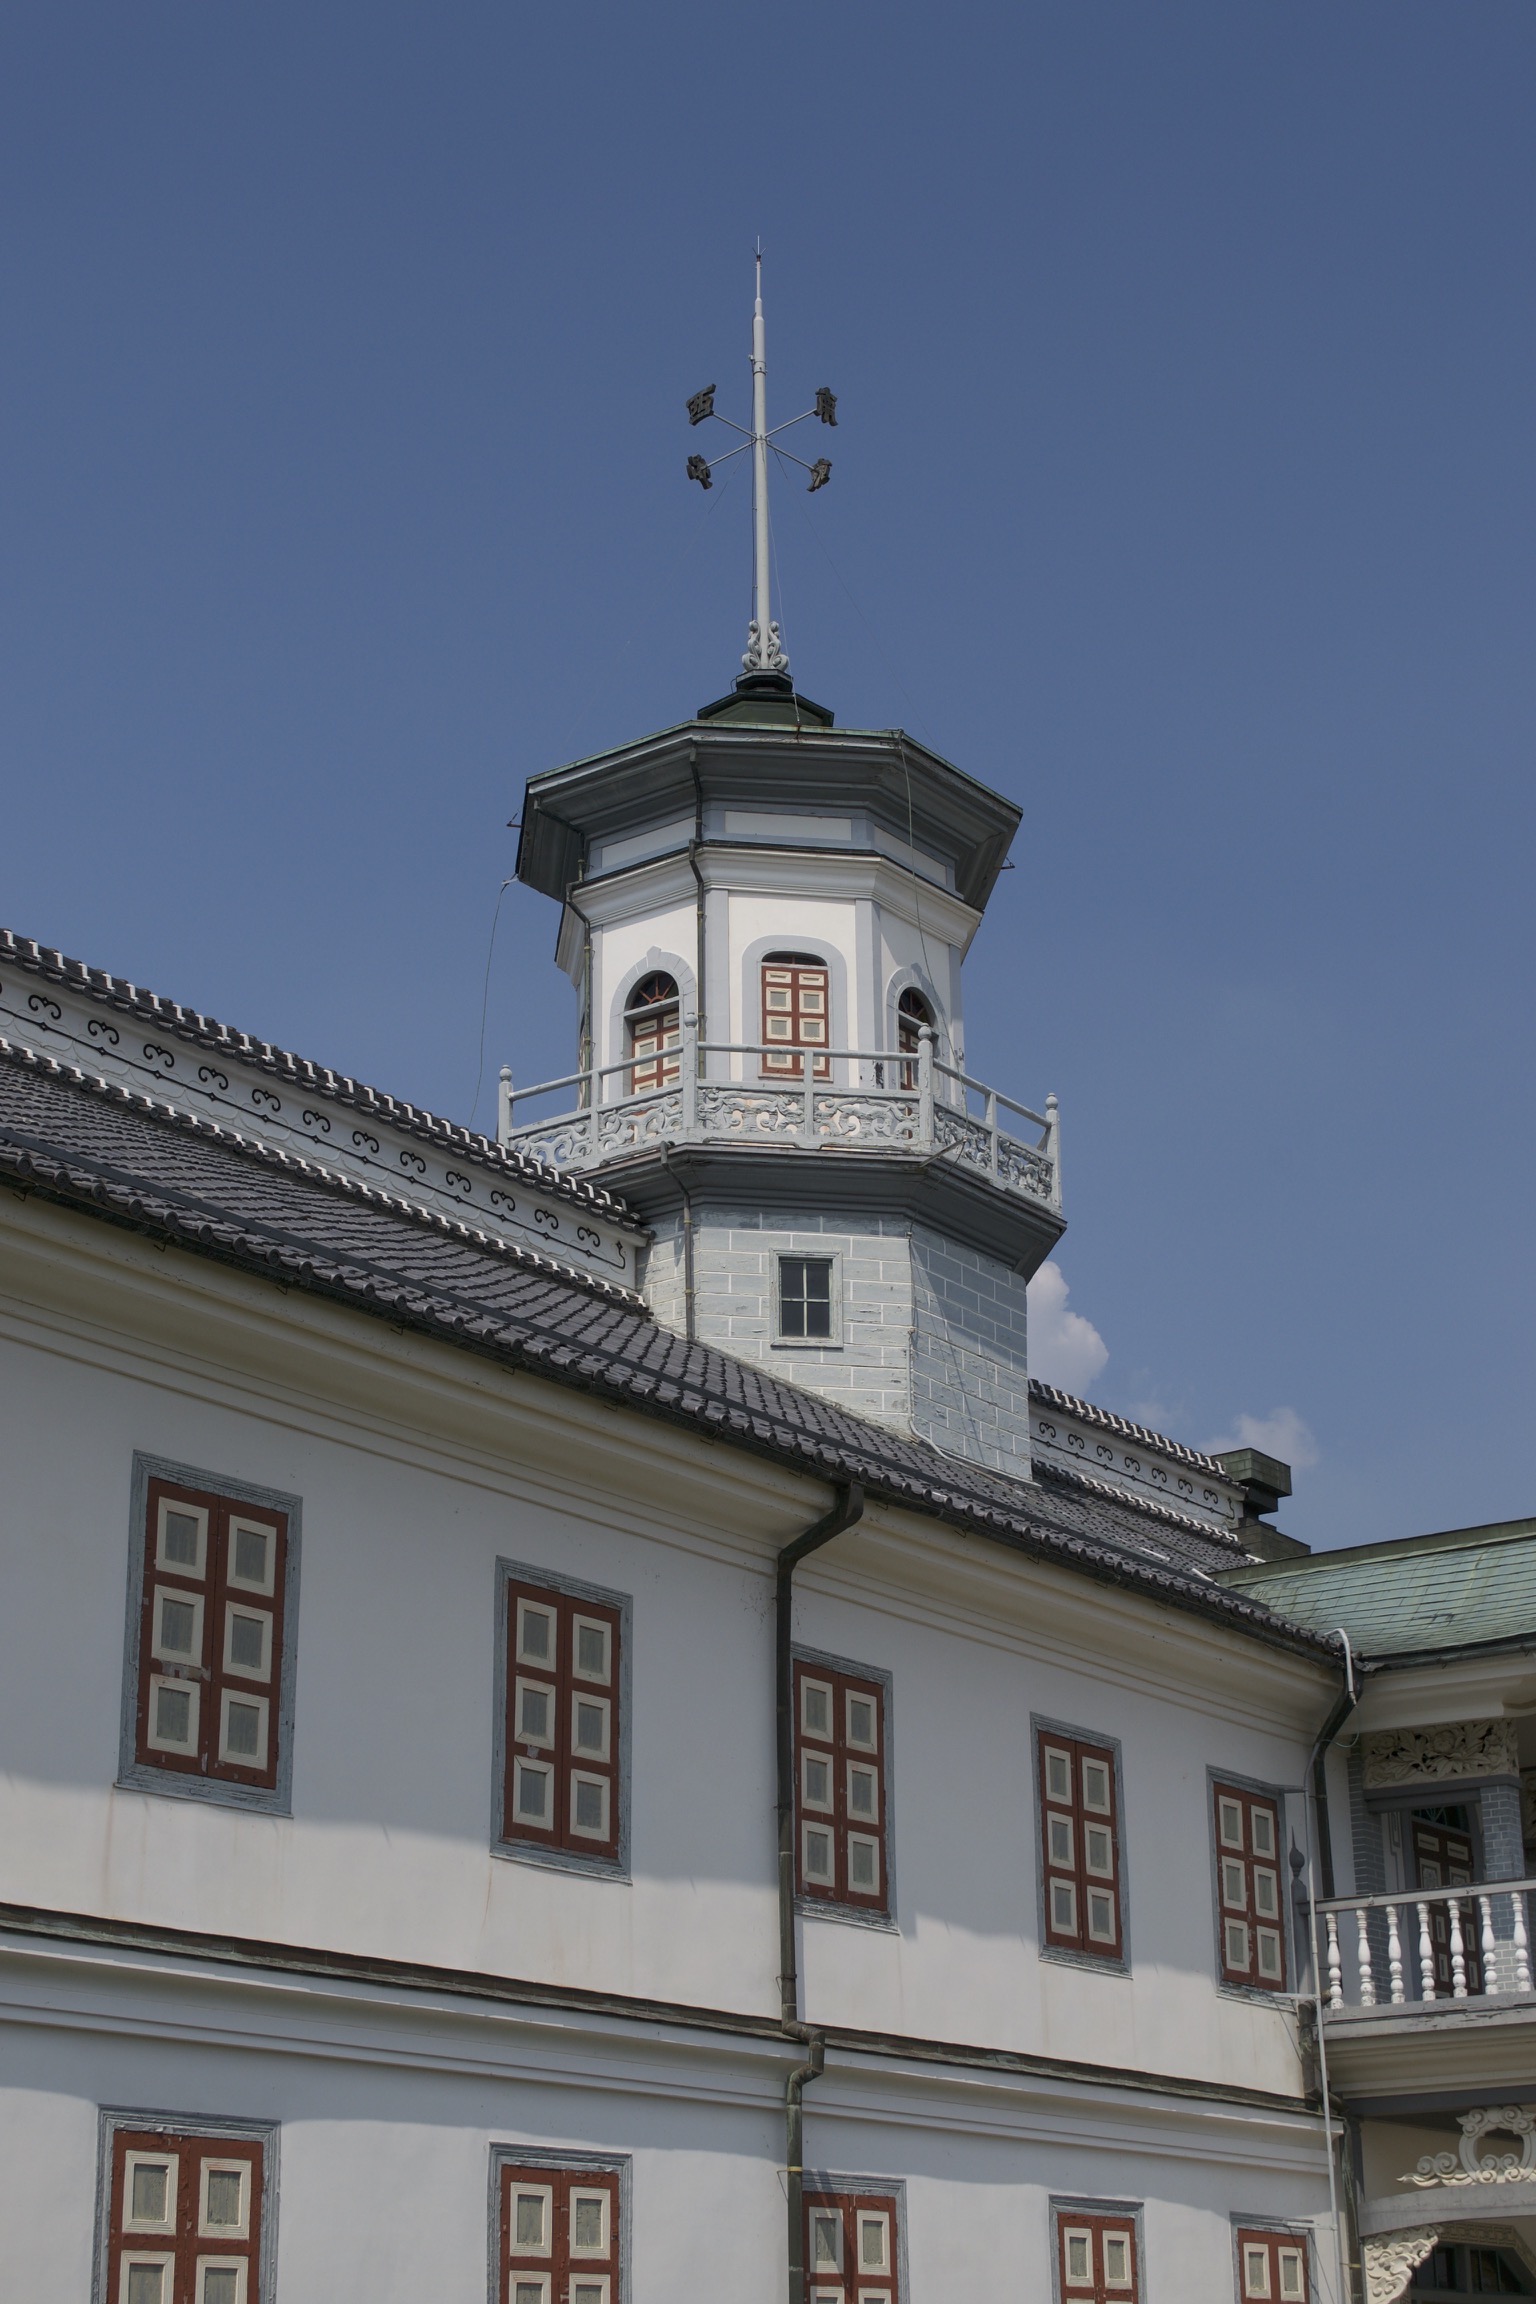 An octagonal tower atop a low, wide western-style building with Japanese elements.